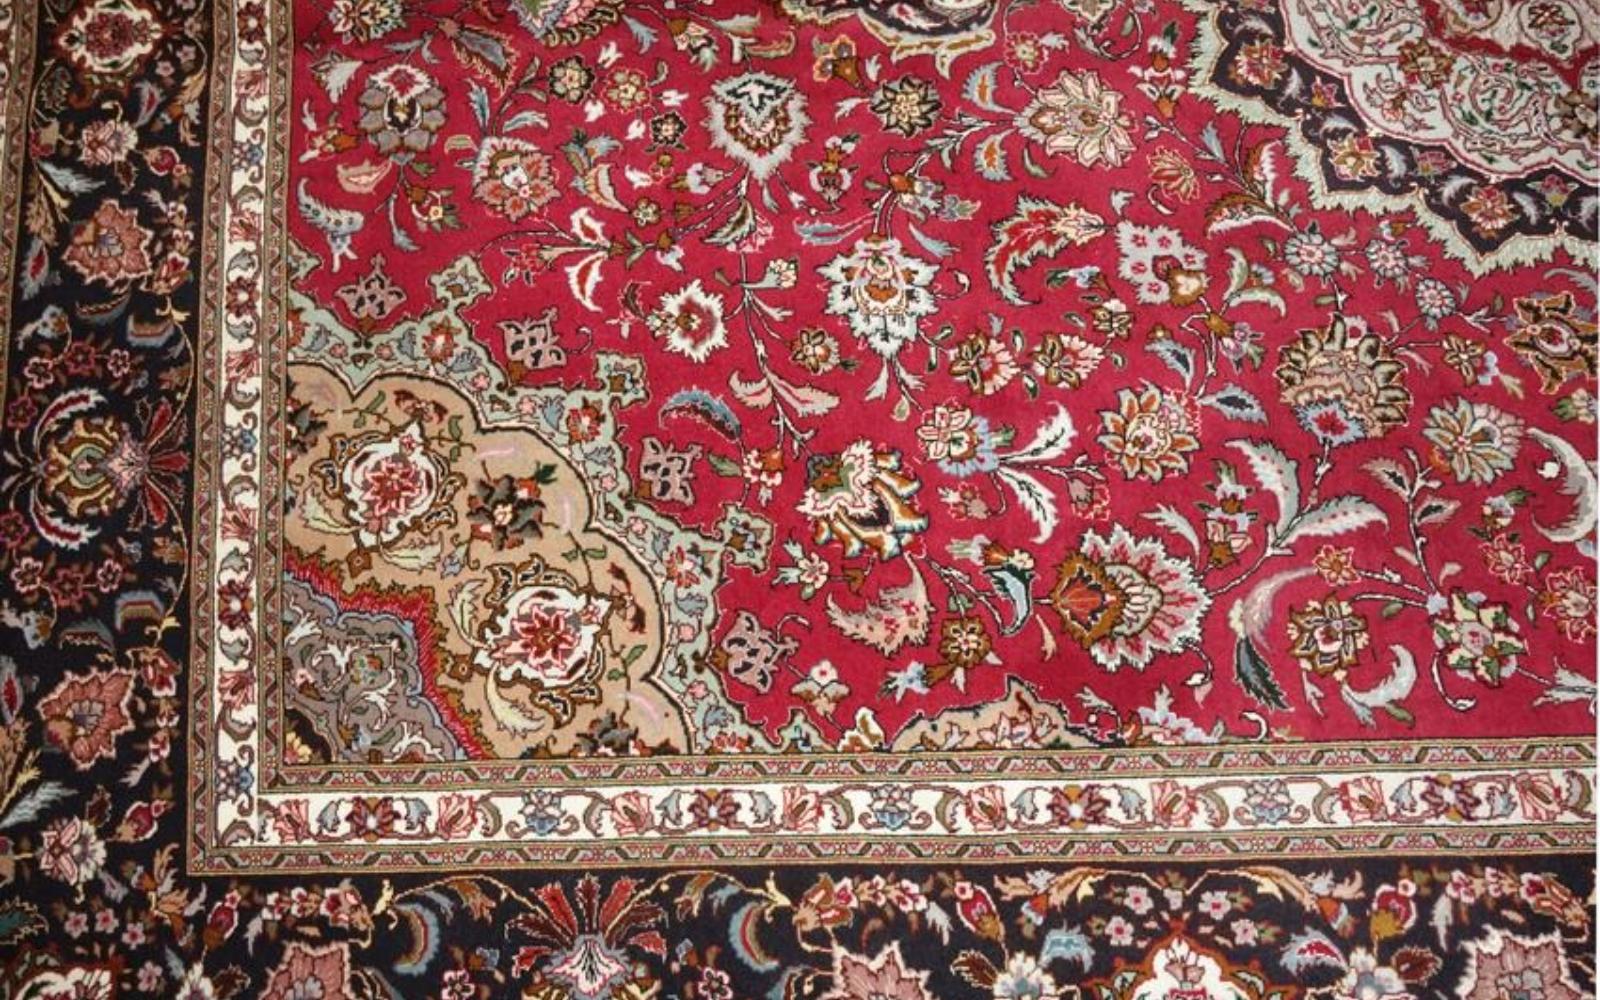 Very fine Persian Tabriz Silk & Wool - 10.2' 6.7' In Good Condition For Sale In Newmanstown, PA